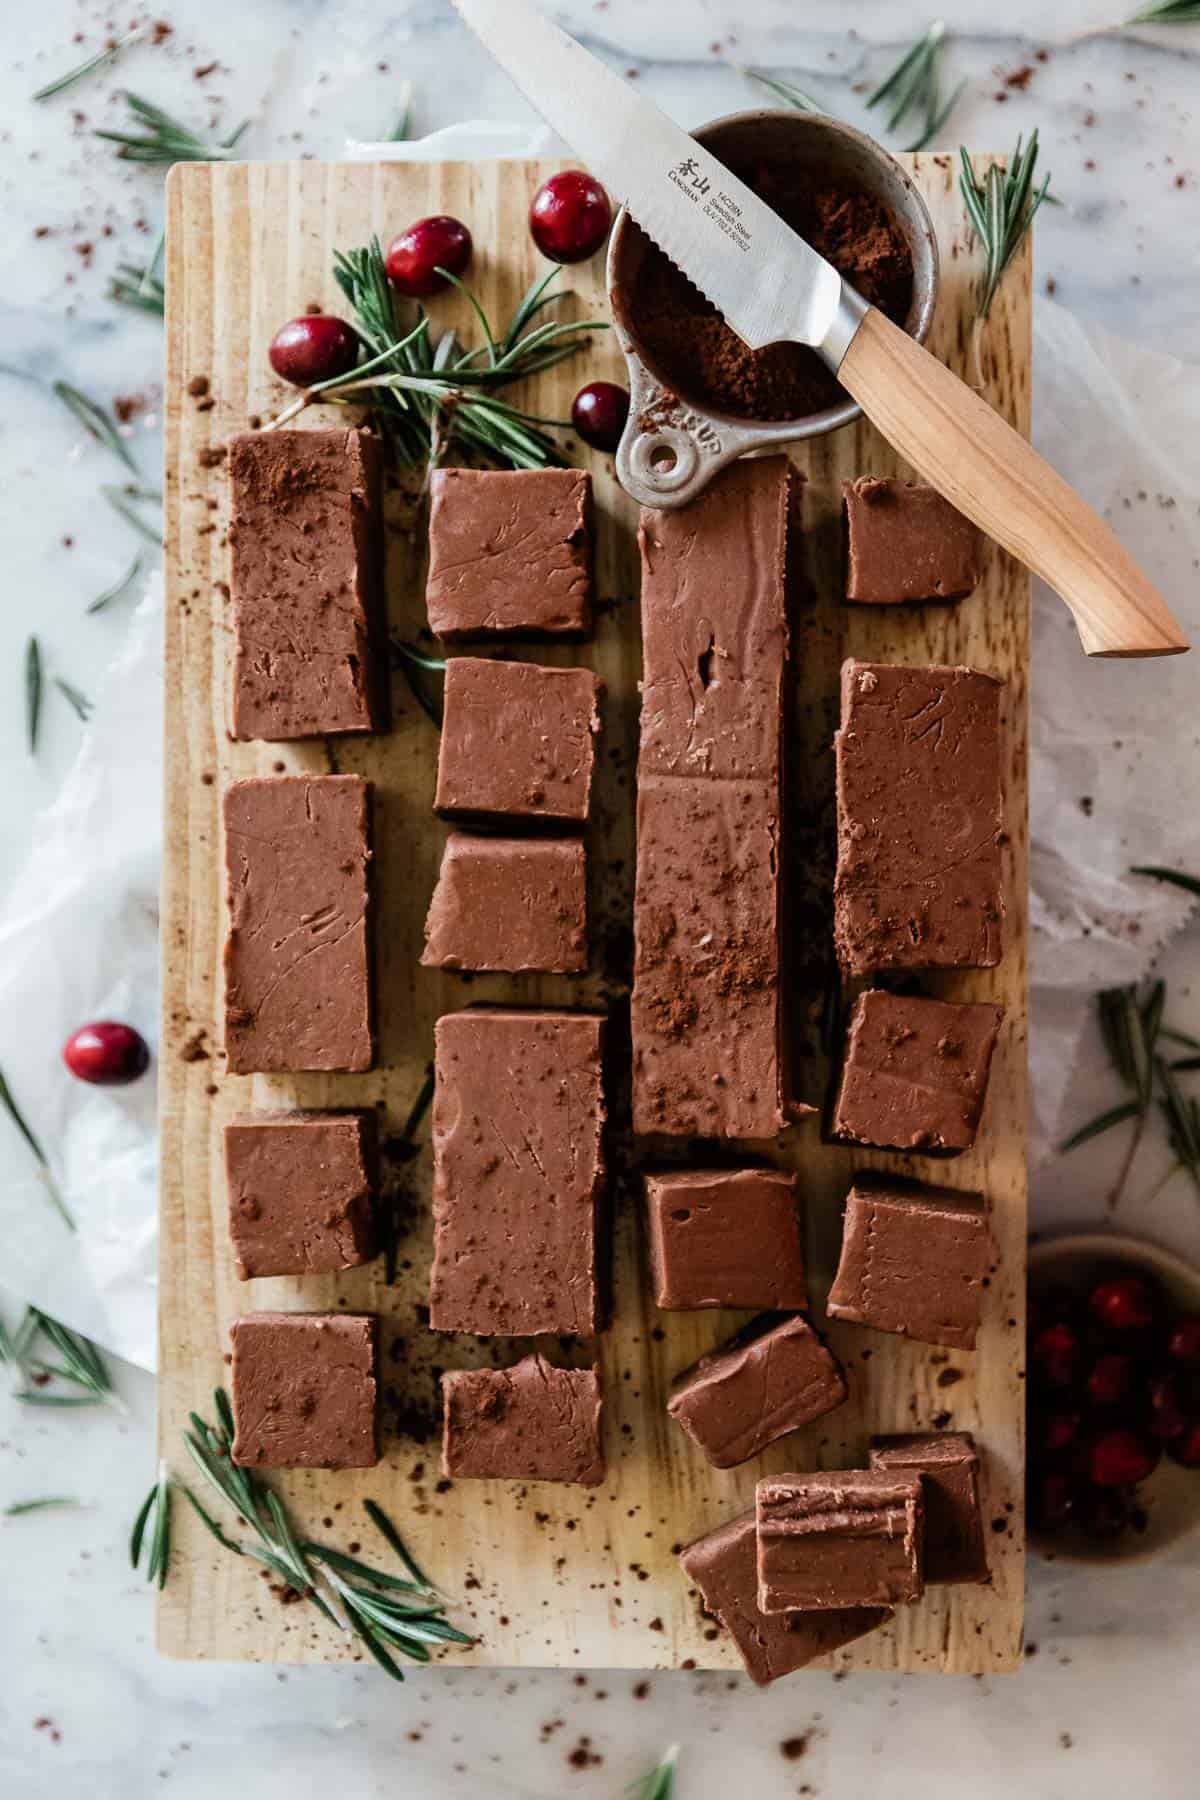 Old fashioned Hershey bar fudge cut and laid on a wooden cutting board. There are cranberries to the side.